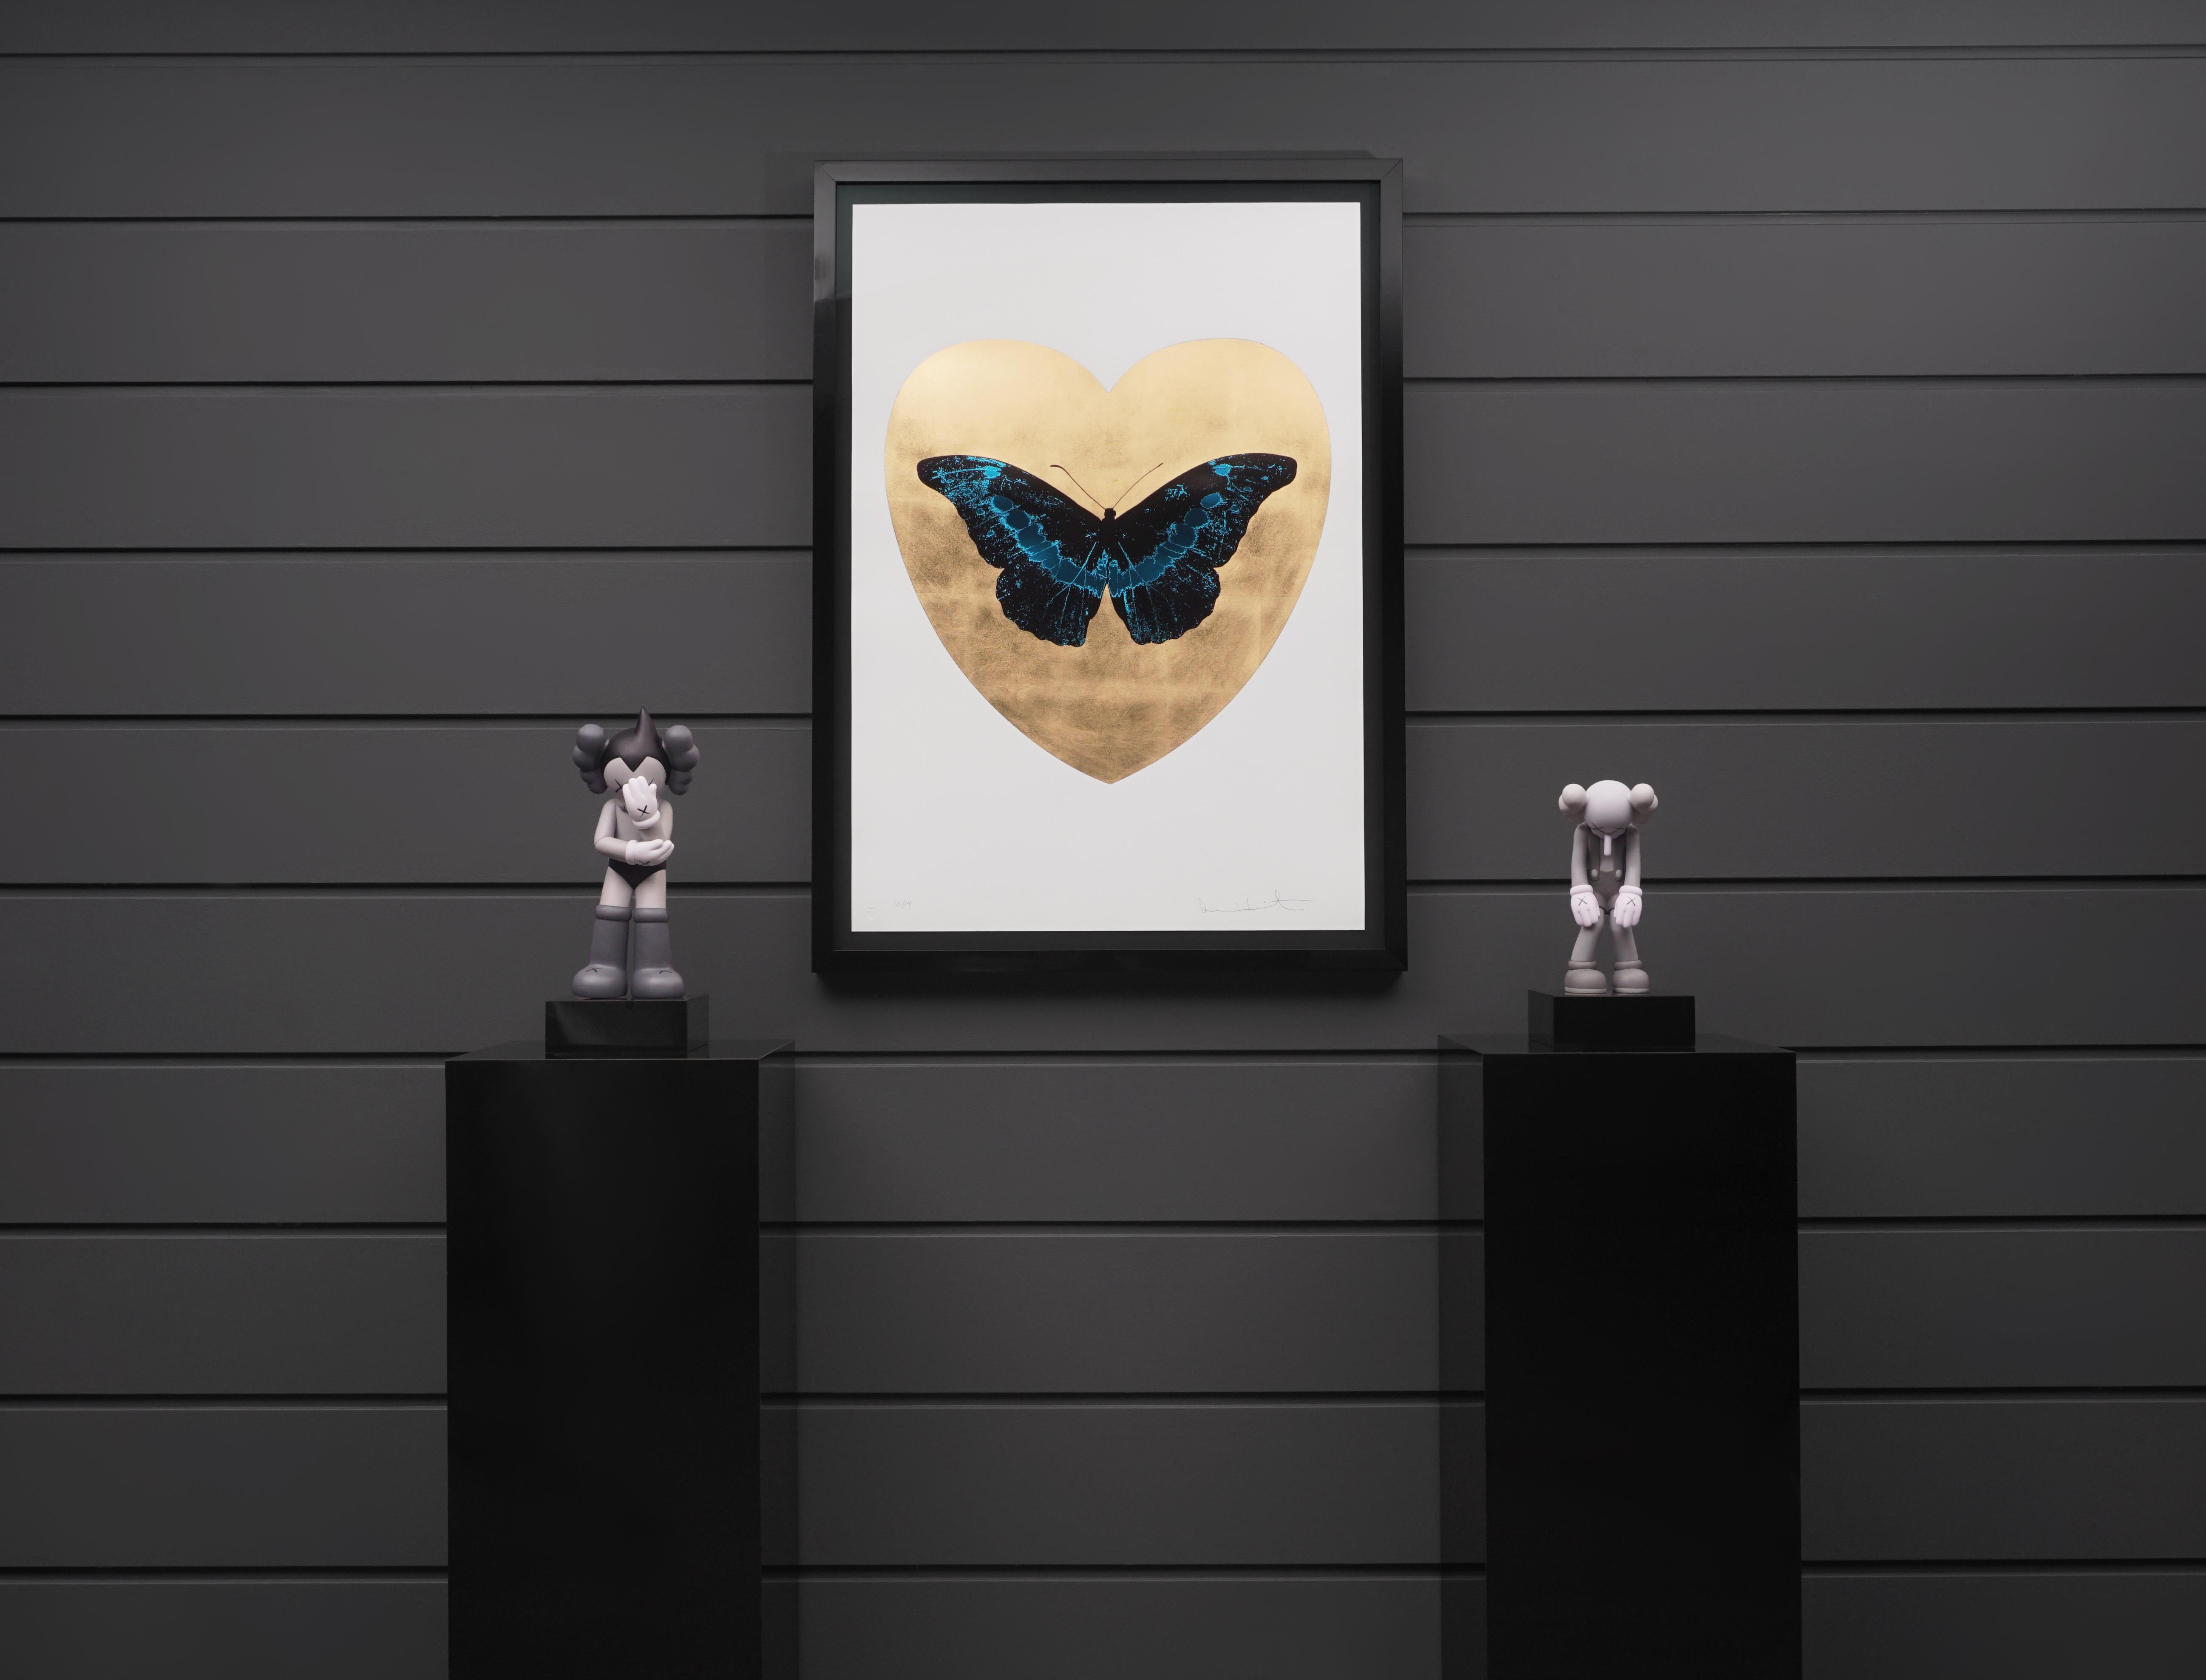 Damien Hirst, 'I Love You' Butterfly, Turquoise/Gold, 2015 8